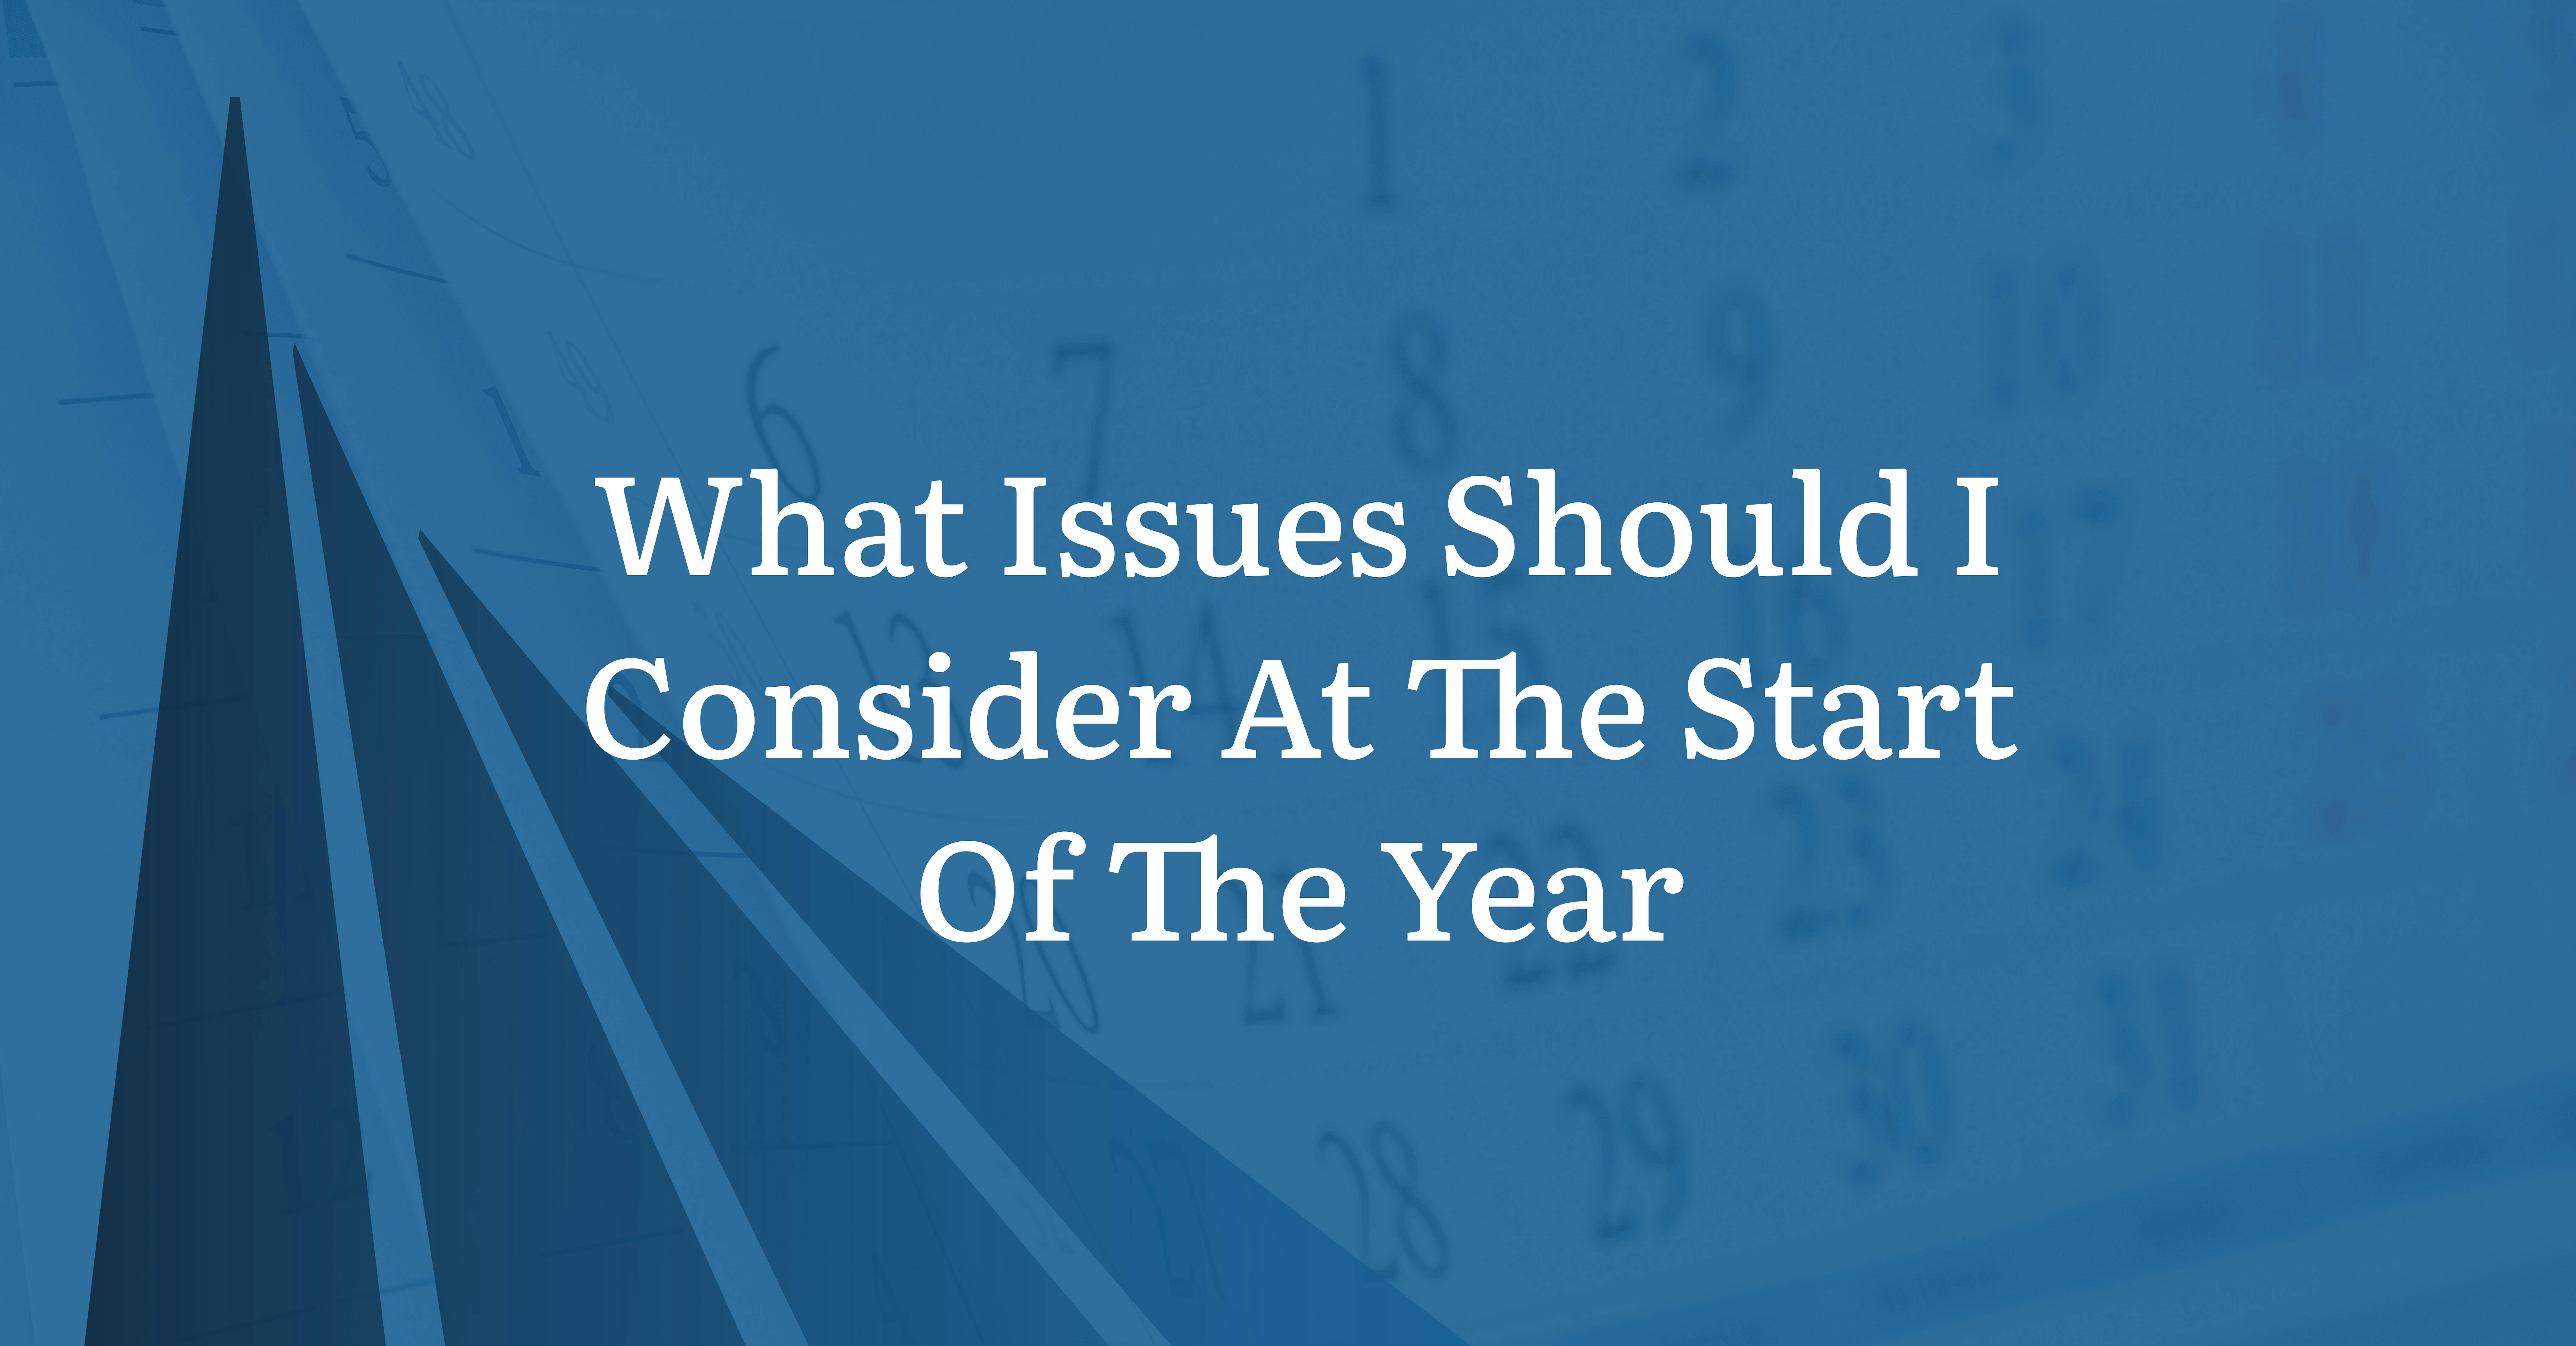 What Issues Should I Consider At The Start Of The Year